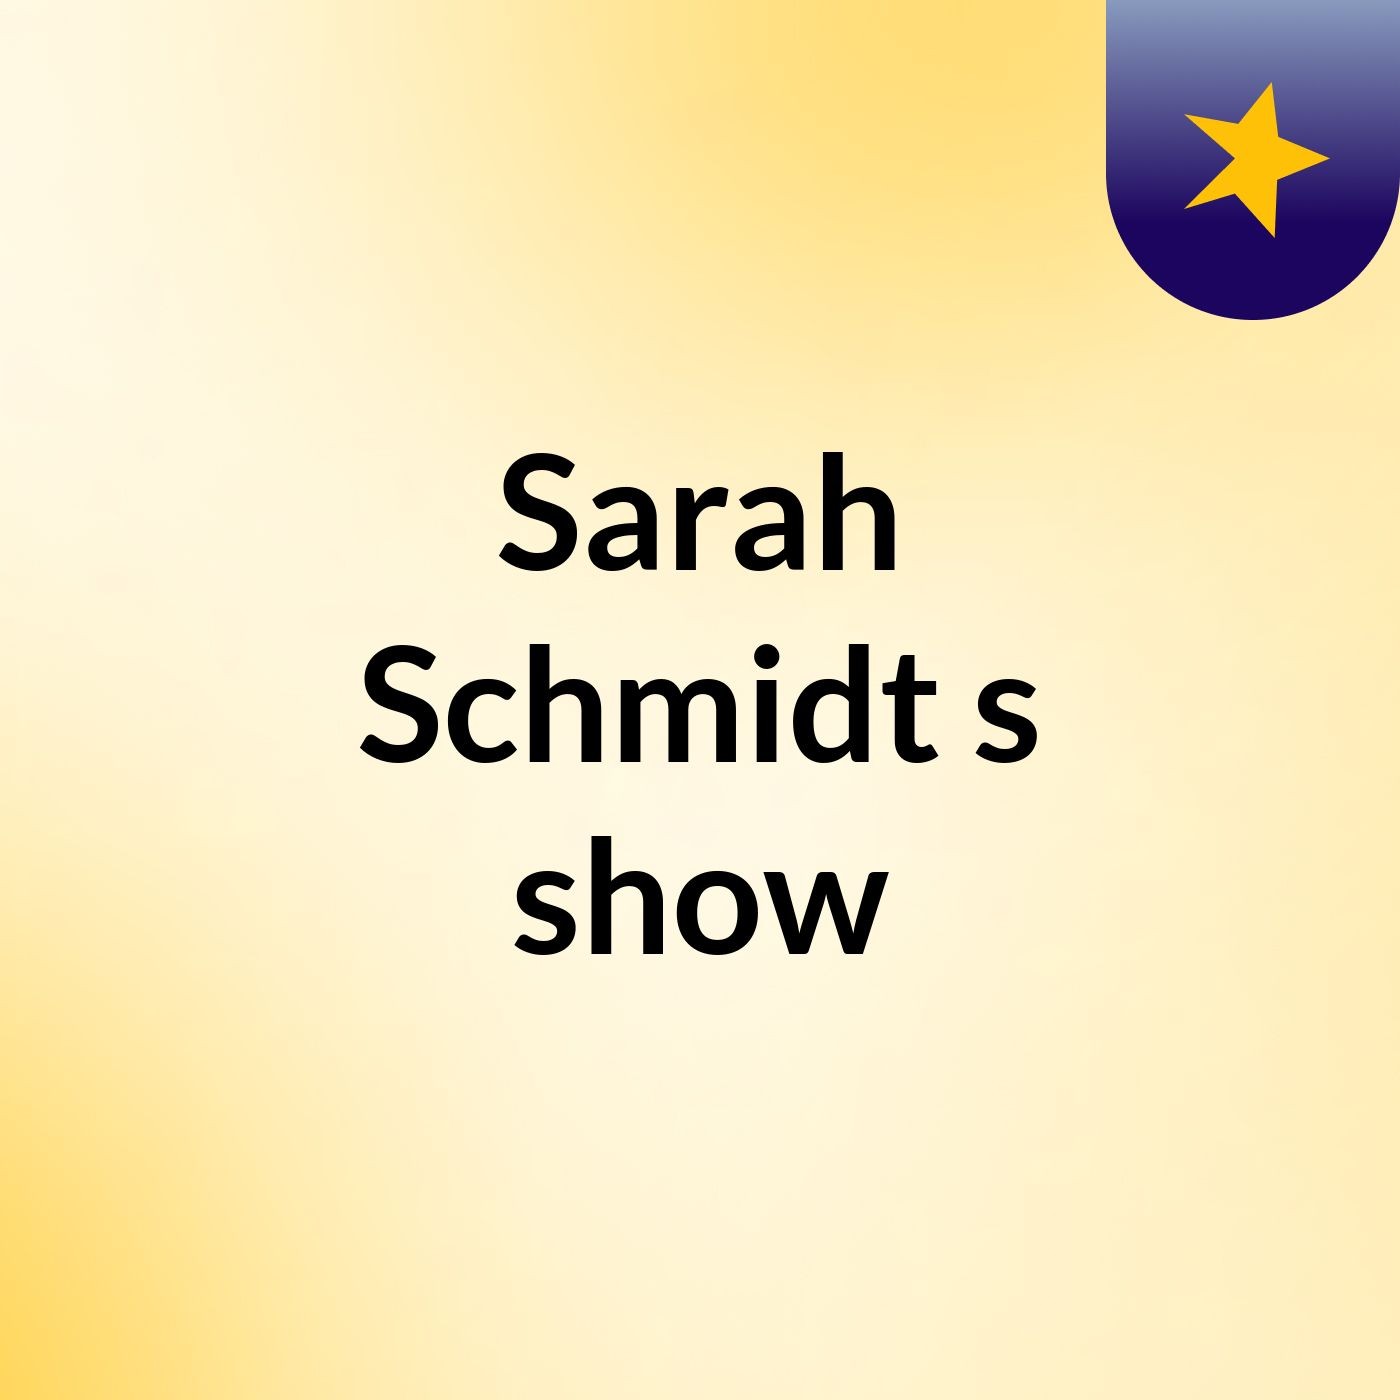 My very first episode with Spreaker Studio - Introduction Of Sarah